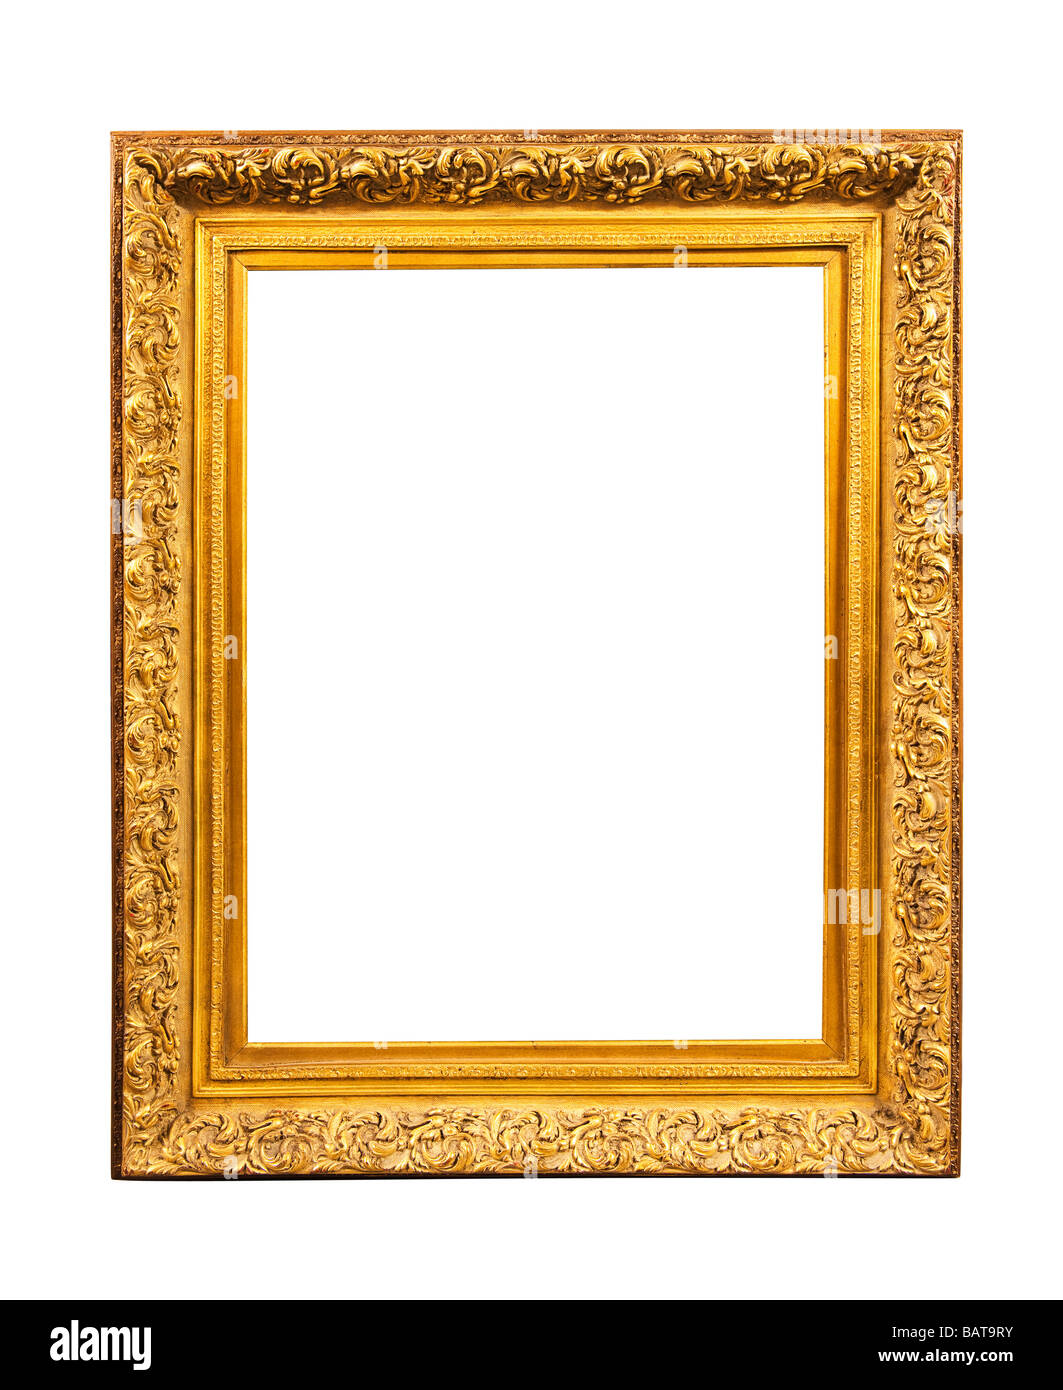 Ornate wooden picture frame Stock Photo